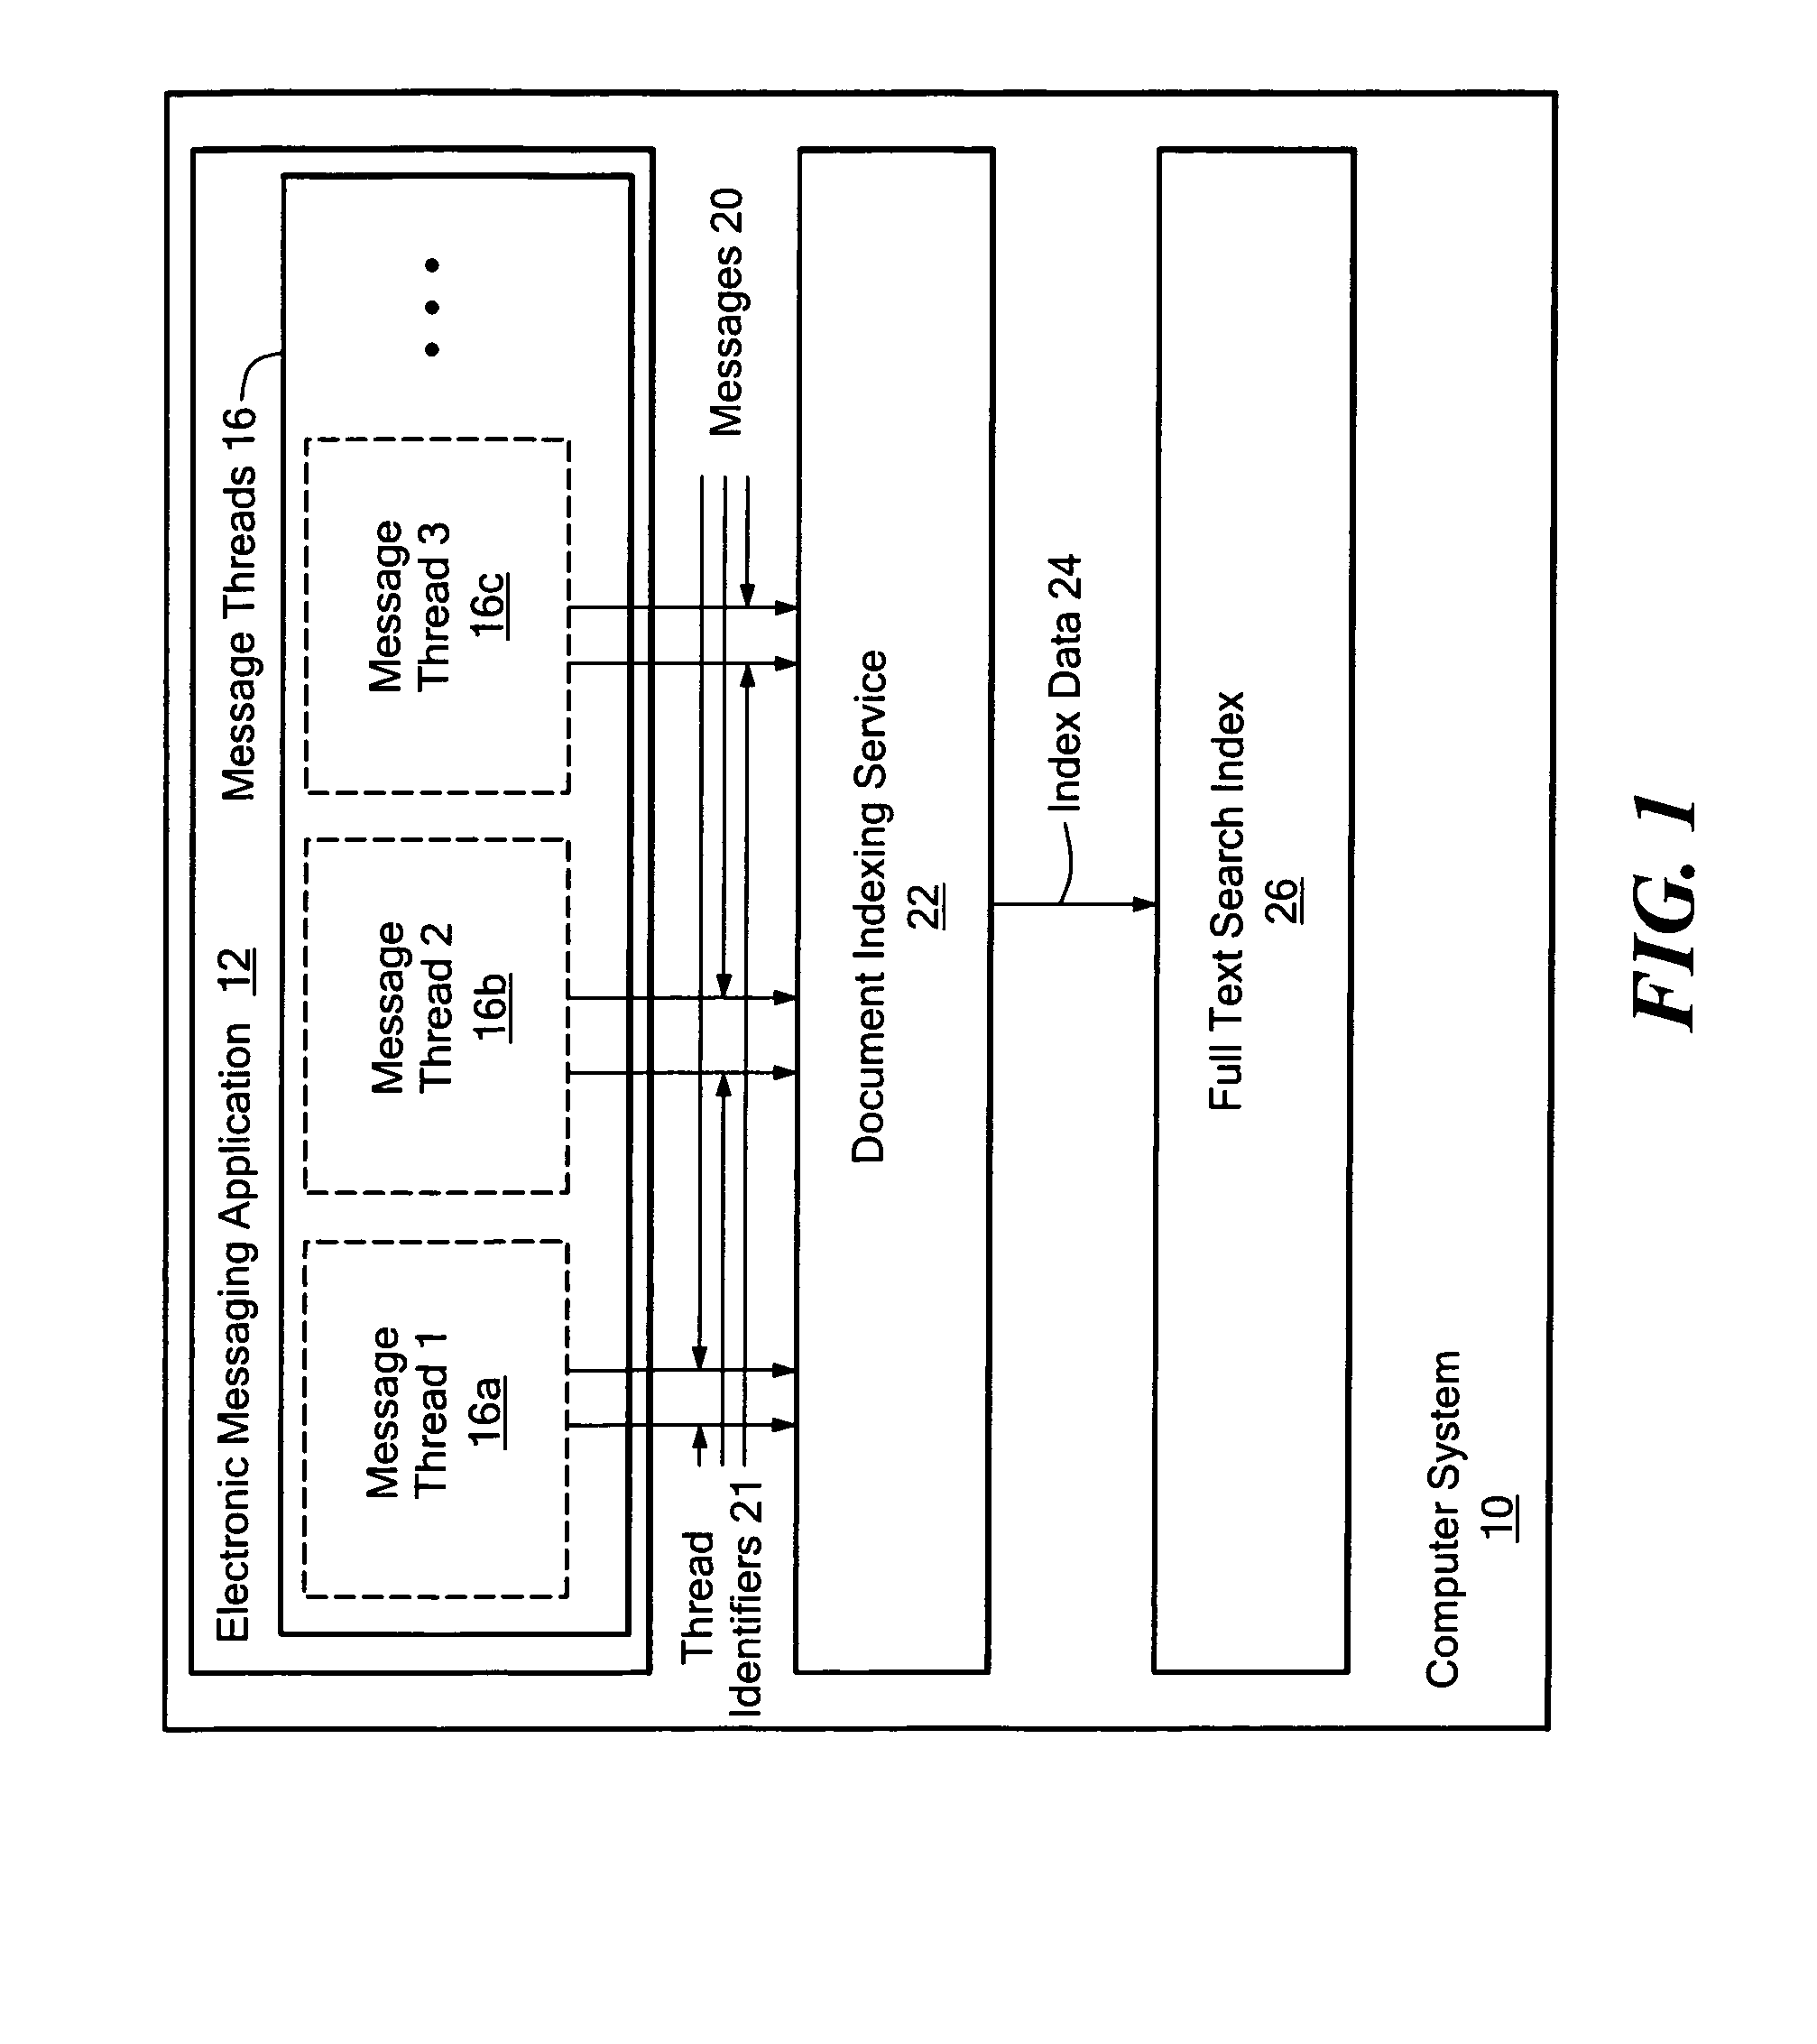 Method and system for providing a search index for an electronic messaging system based on message threads